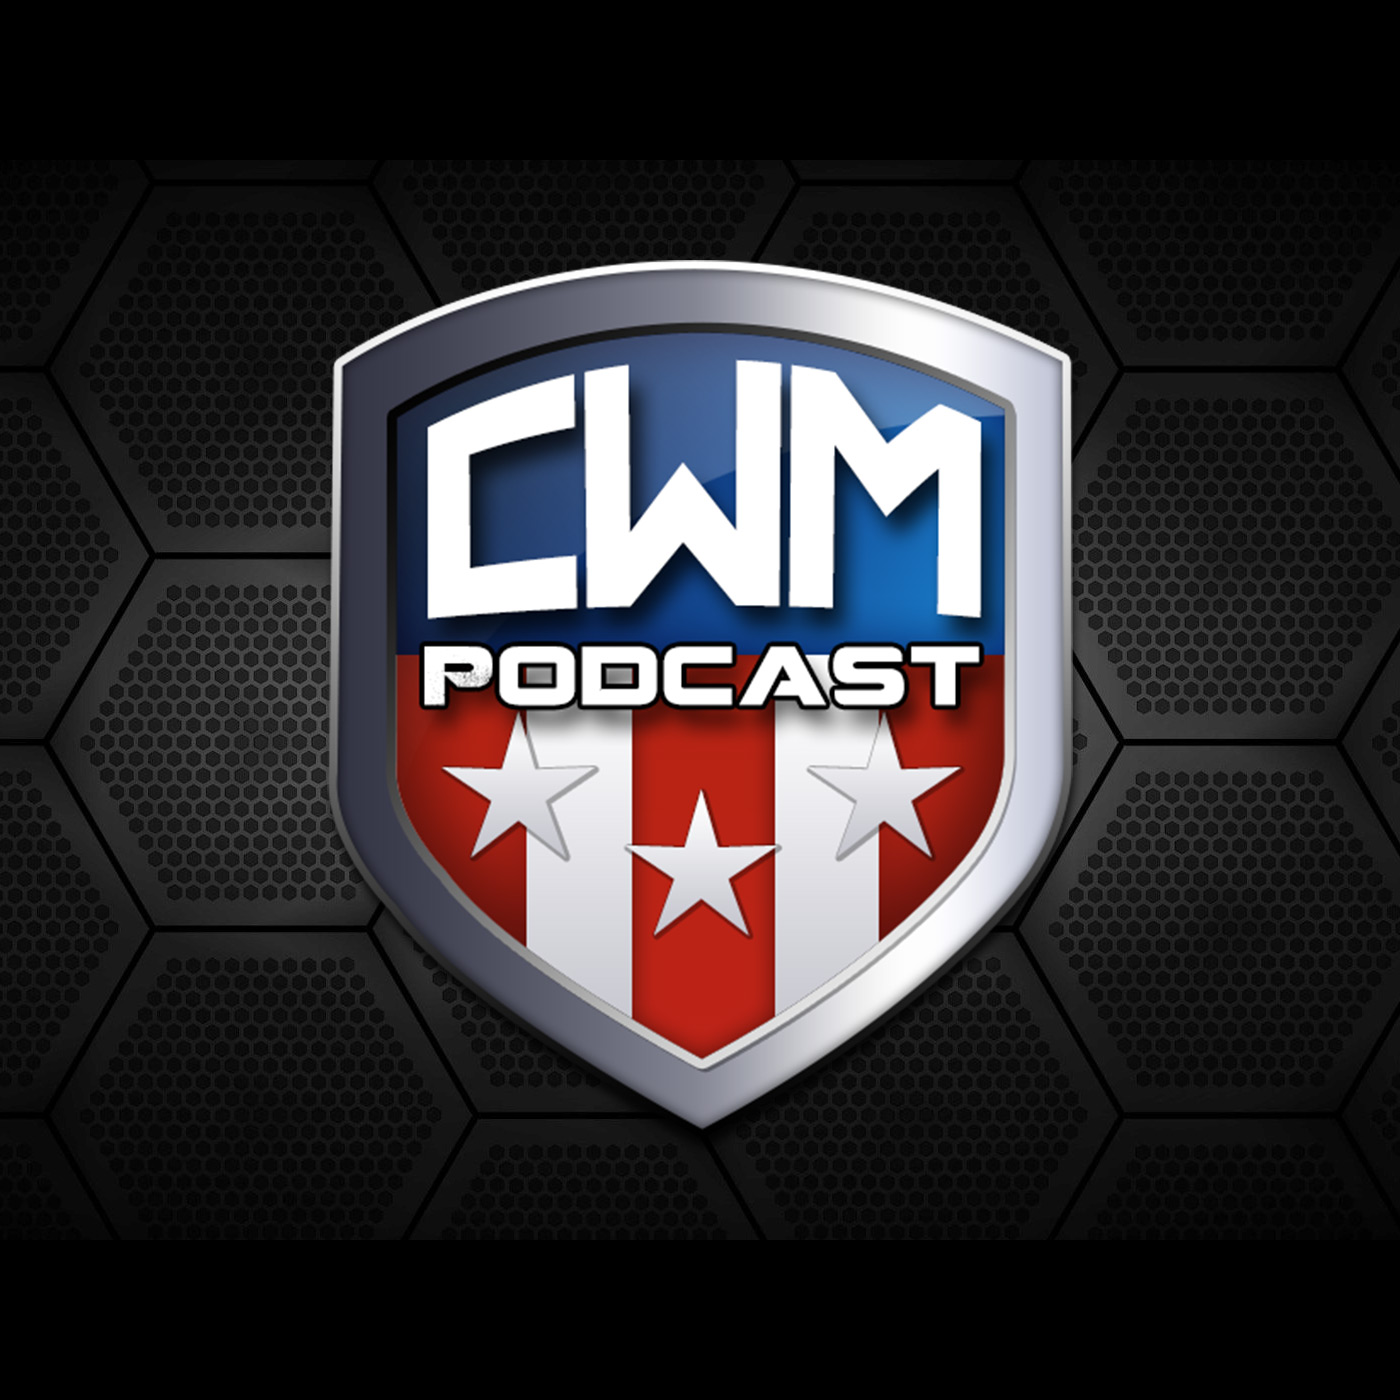 Welcome to NFL Training Camp 2016 - CWM033